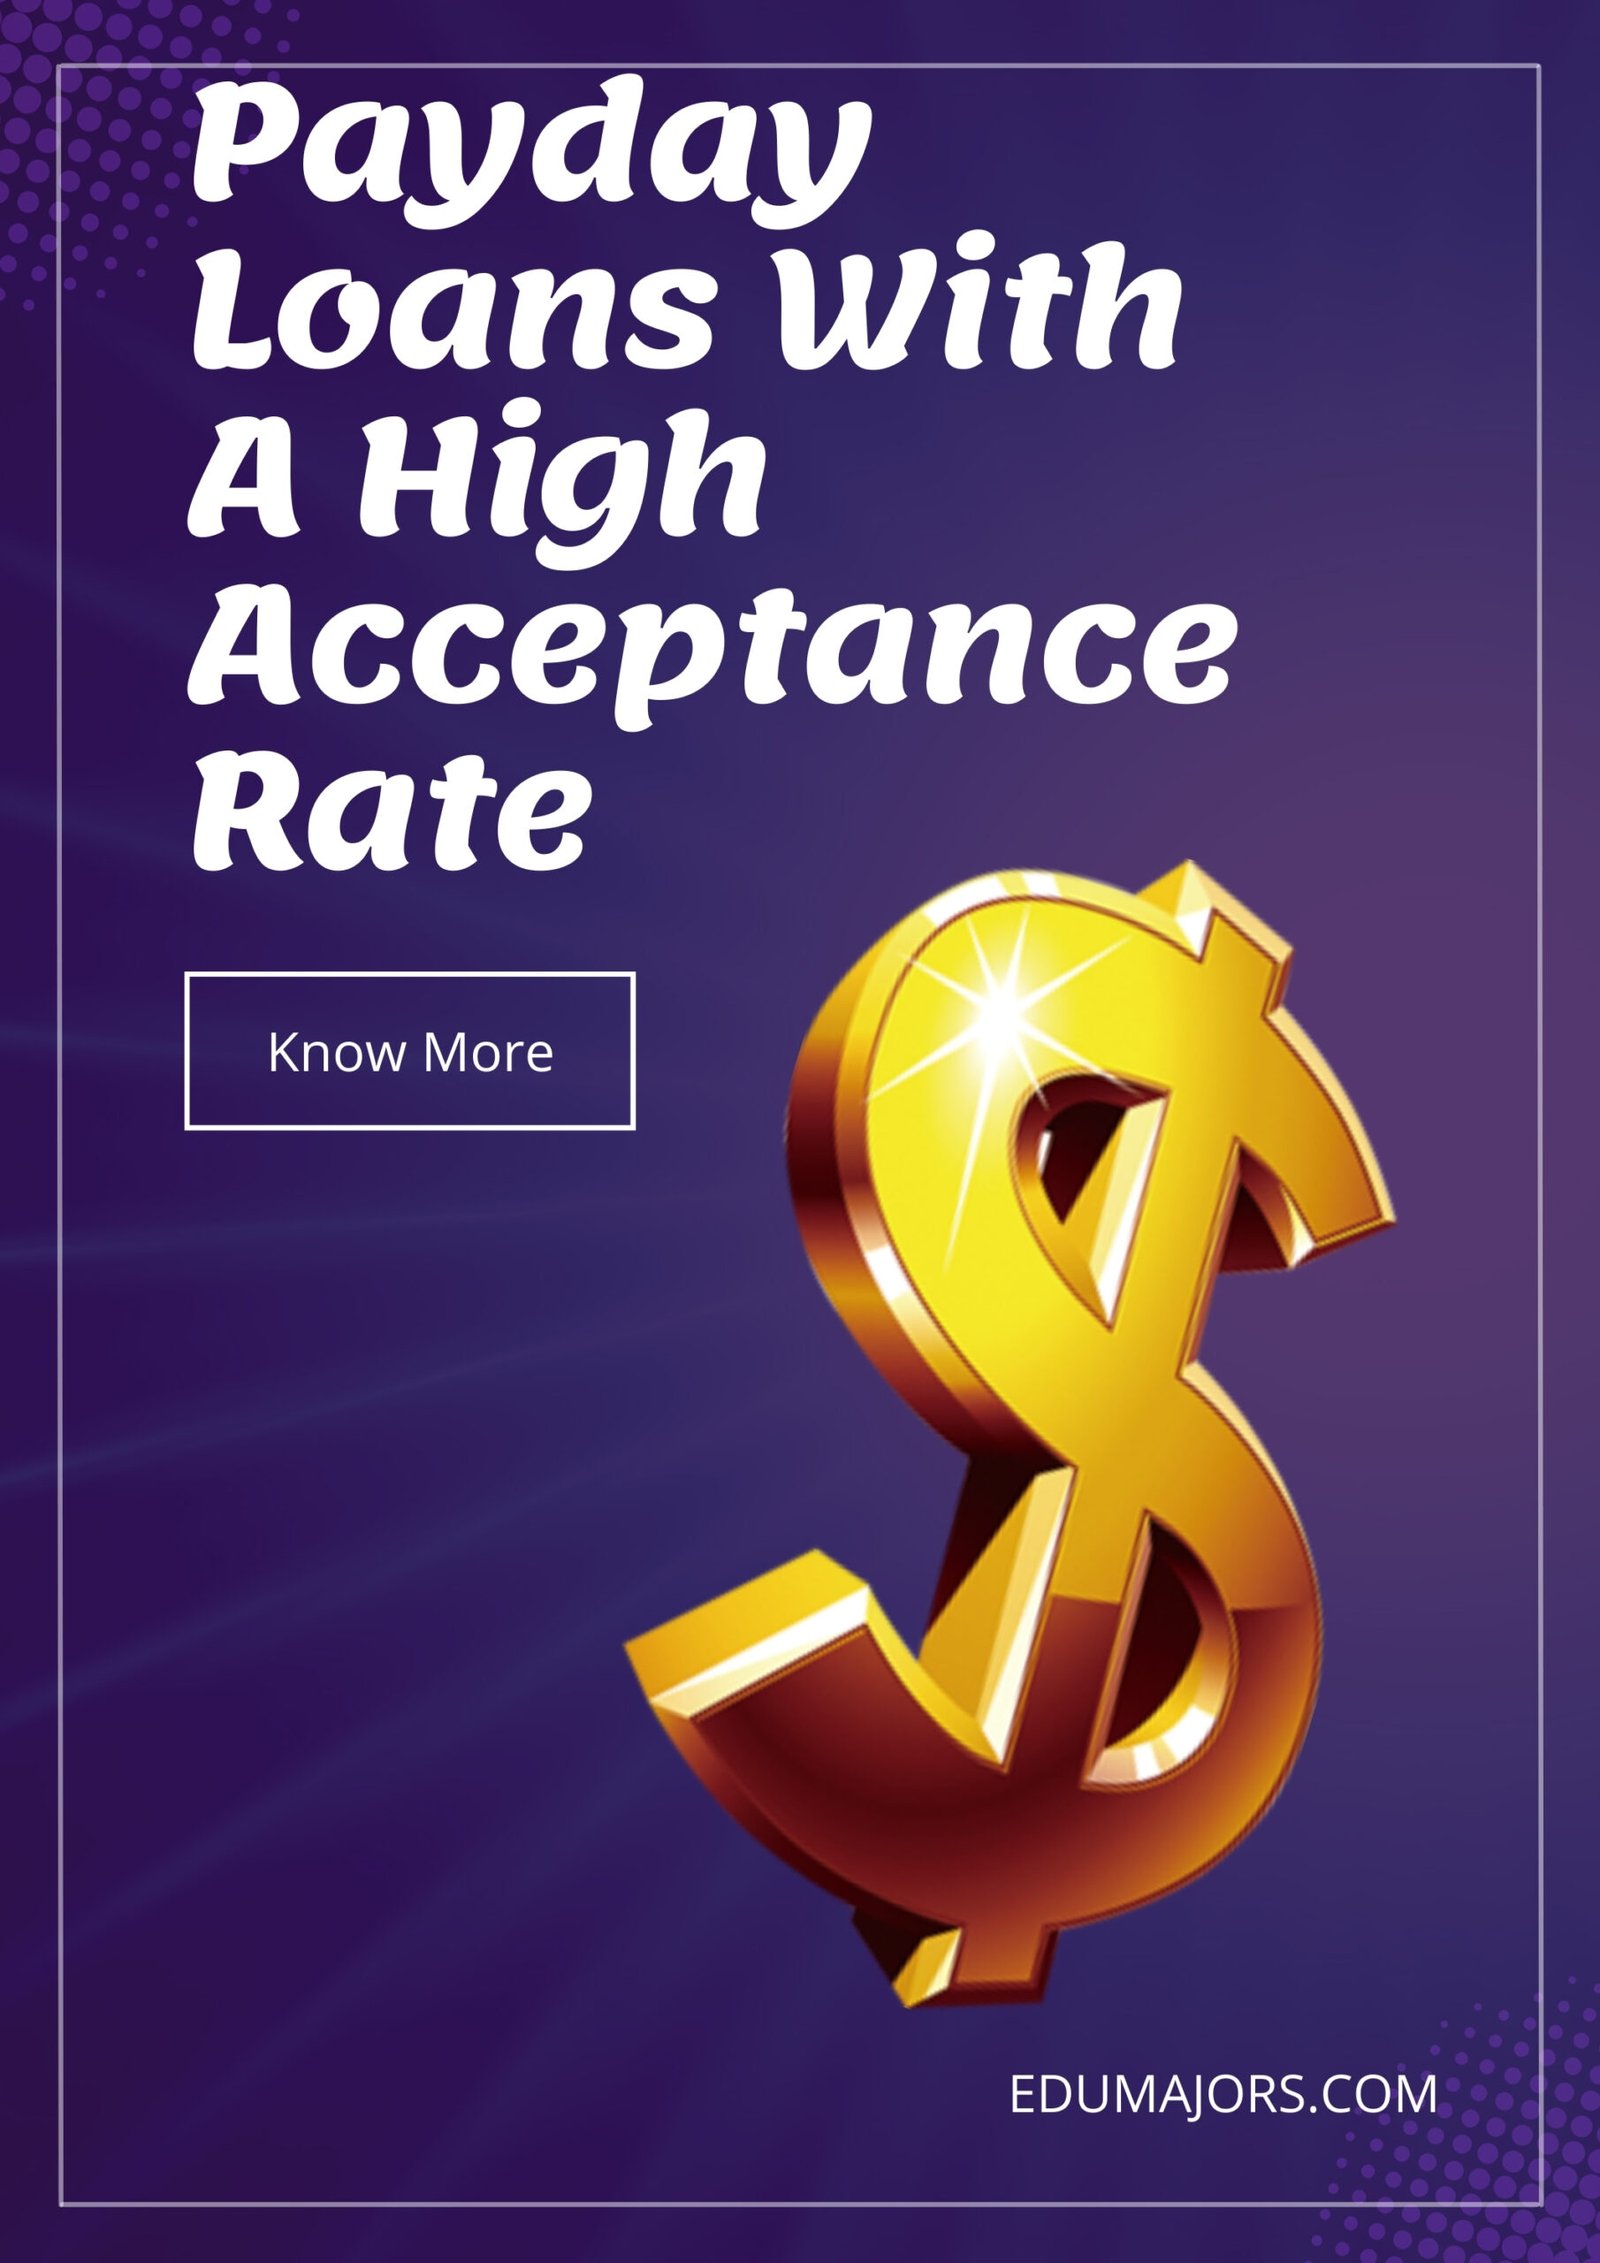 Payday Loans With A High Acceptance Rate